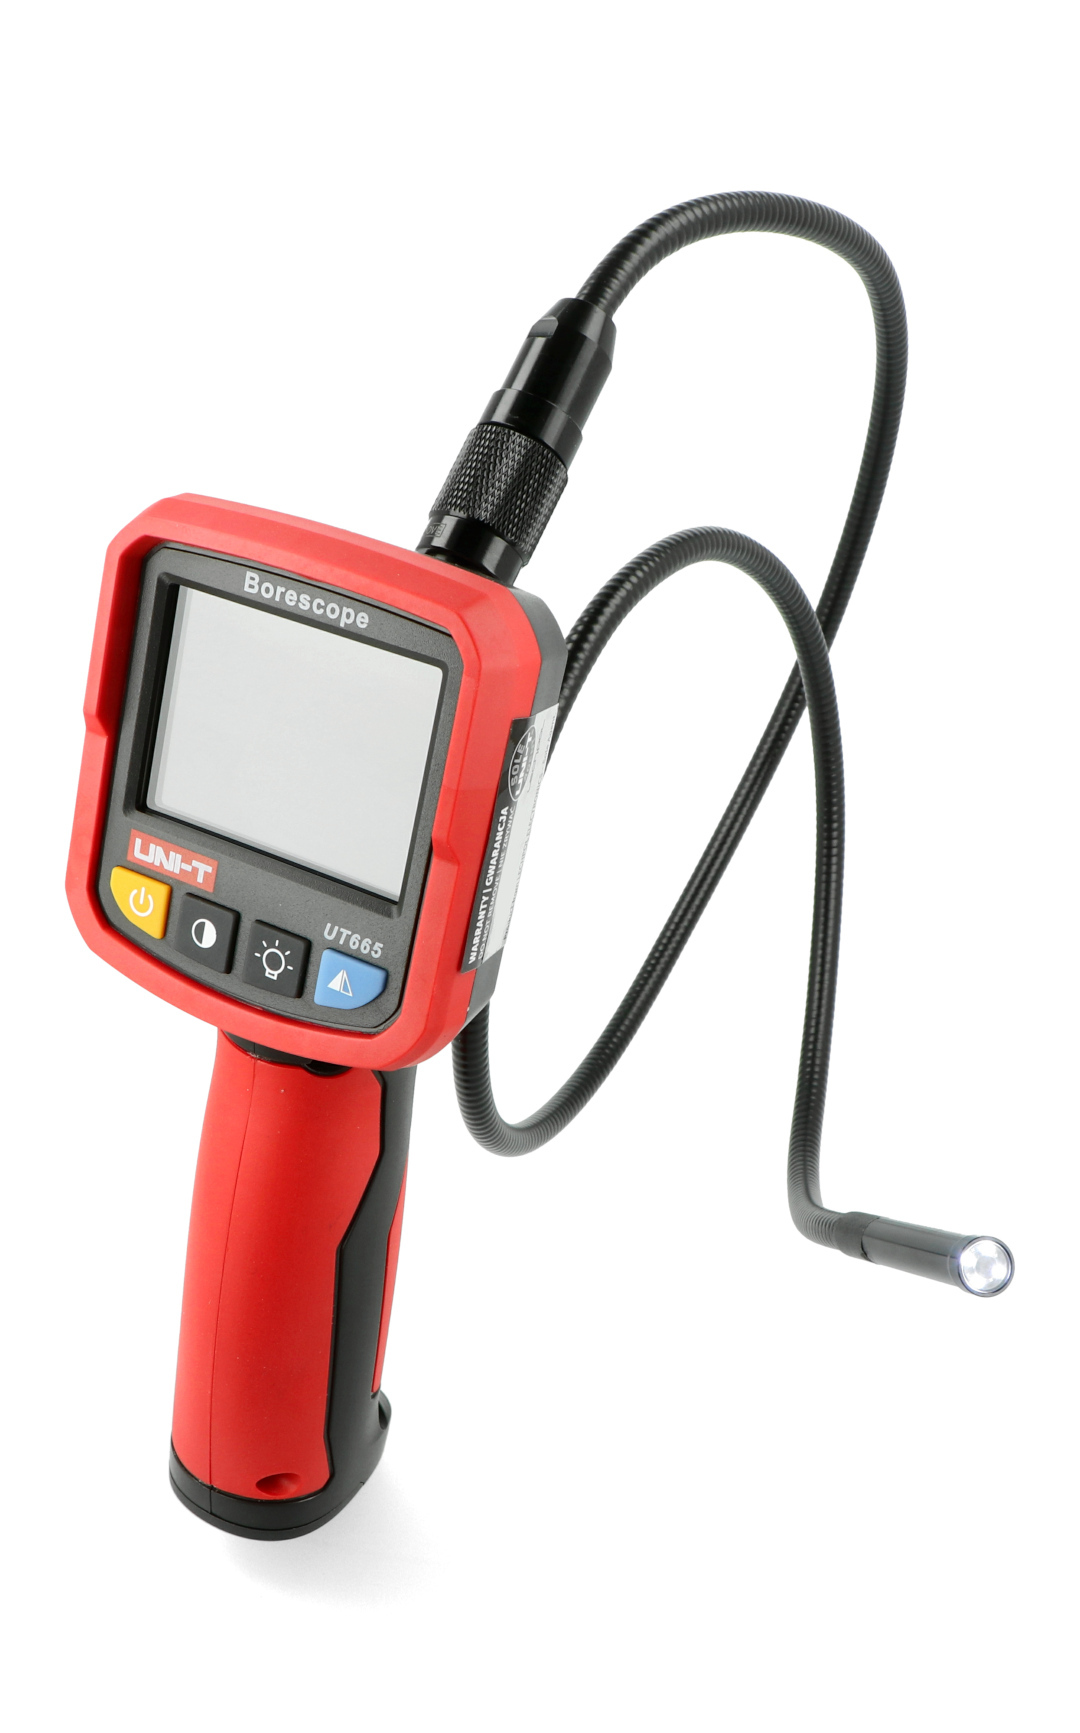 for inaccessible places Endoscope with Flexible Camera Probe Uni-T UT665